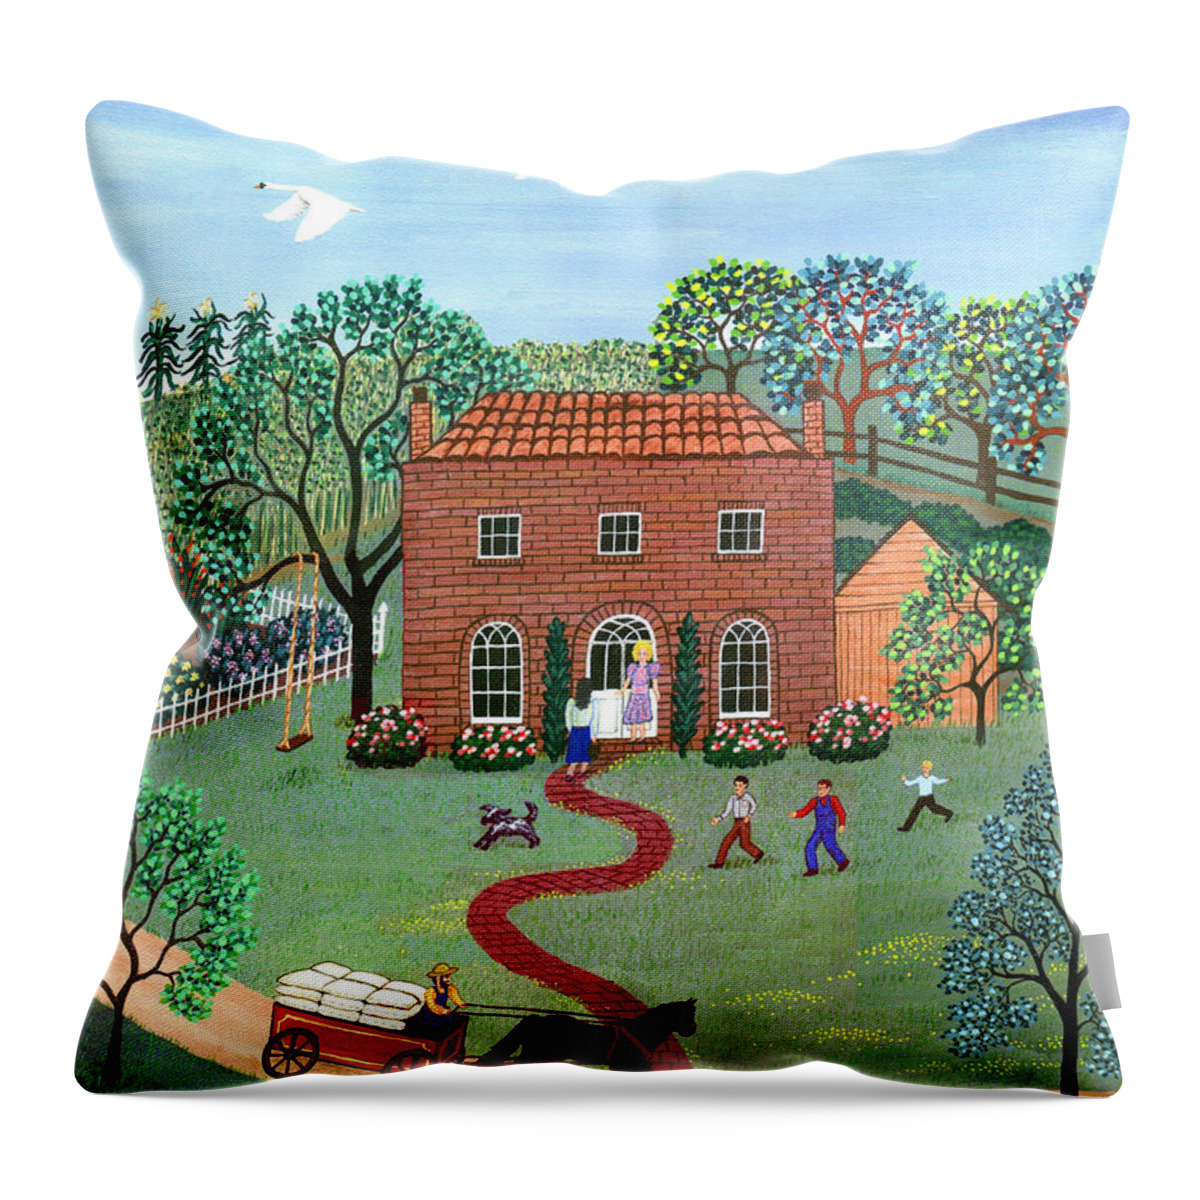 Landscape Throw Pillow featuring the painting Country Visit by Linda Mears